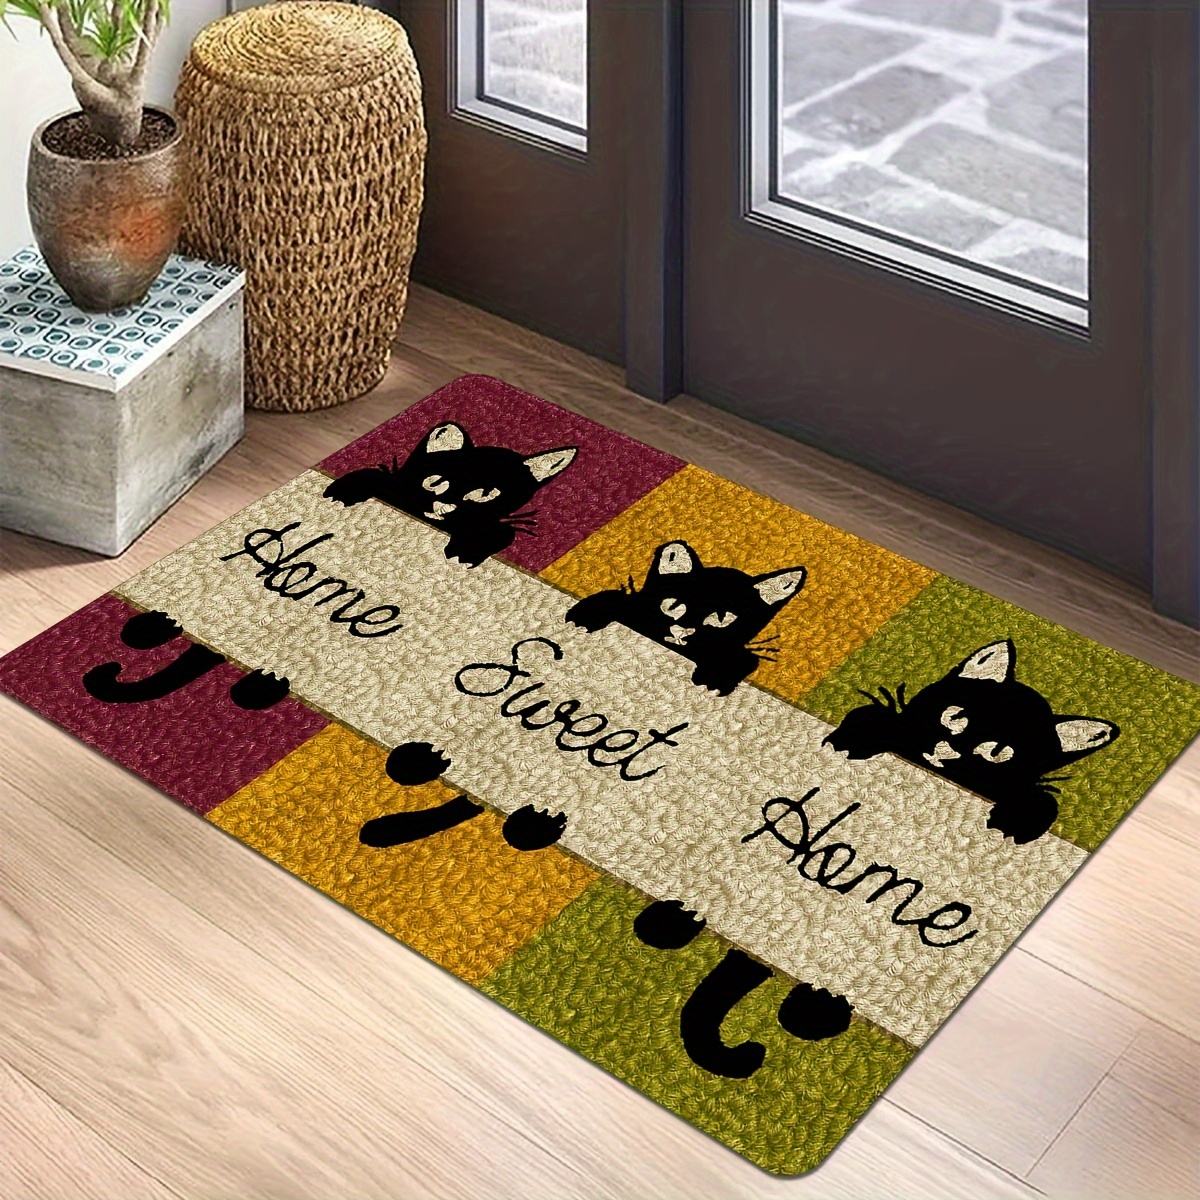 

1pc Cartoon Kitten Motif Door Mat, Animal Print Carpet, Creative Striped Beside Cushion, Non-slip And Stain-resistant Foot Pad, For Kitchen Hallway Bathroom Sink Laundry Room Home Decor Spring Decor